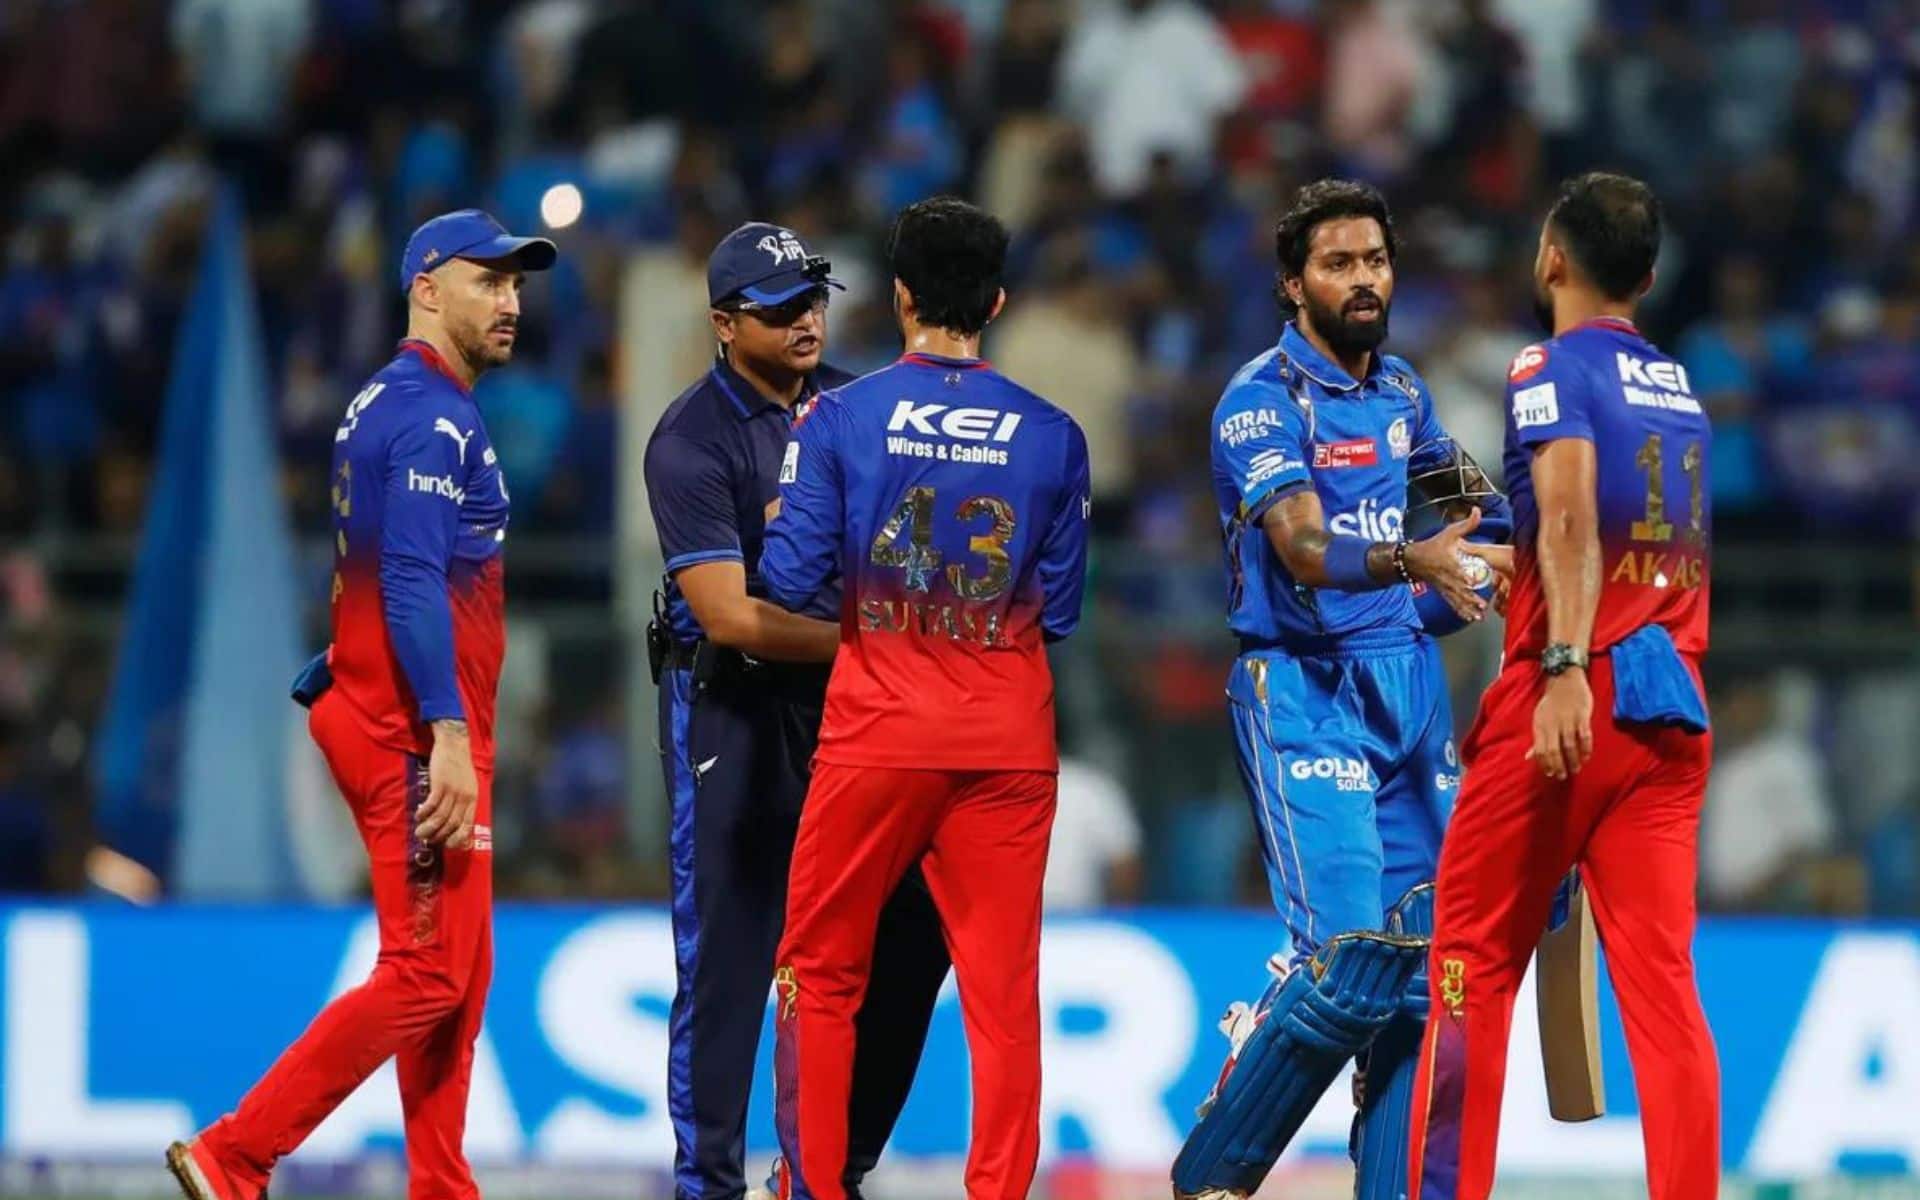 Mumbai Indians defeated RCB by seven wickets [iplt20.com]